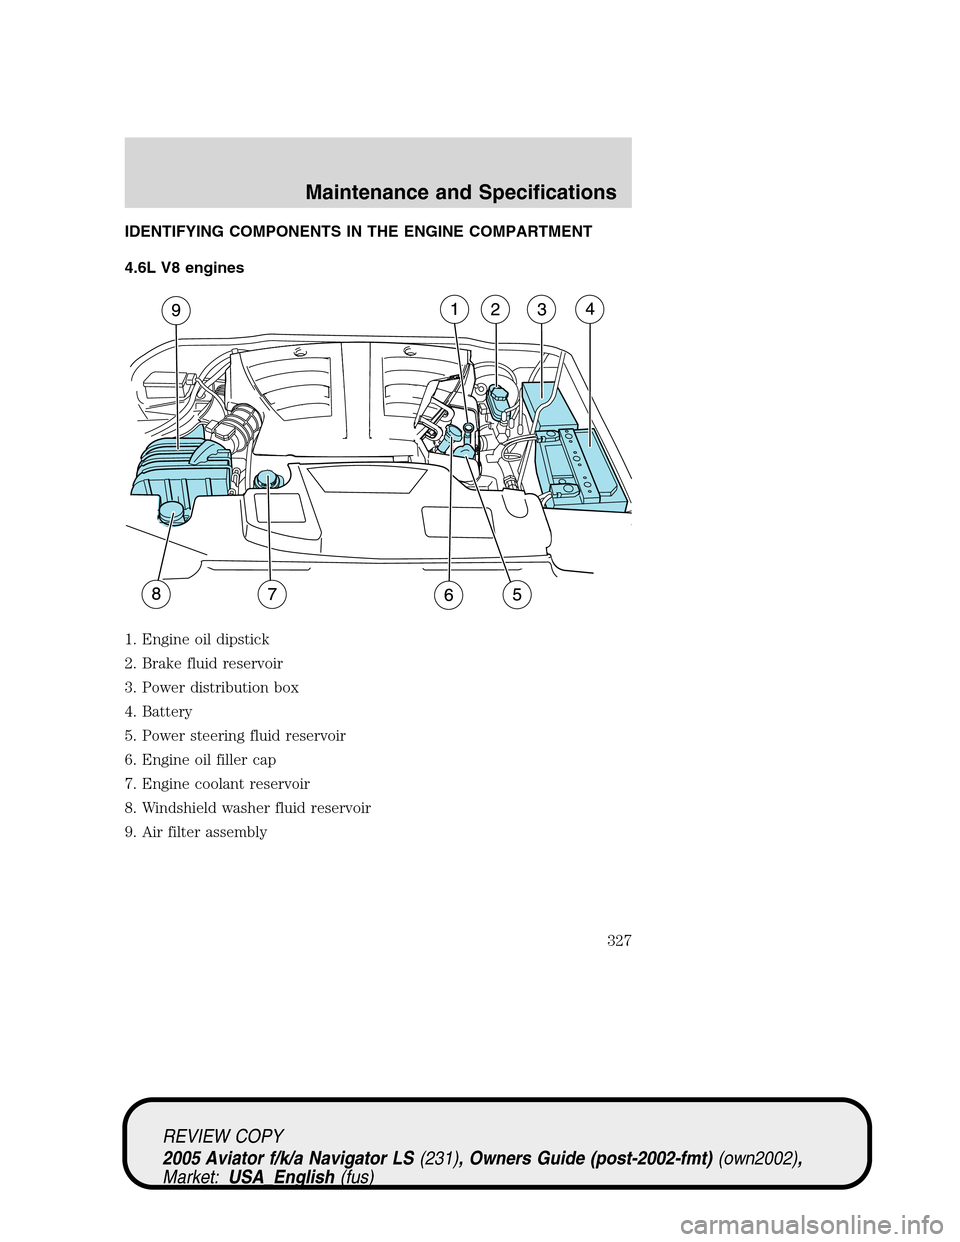 LINCOLN AVIATOR 2005  Owners Manual IDENTIFYING COMPONENTS IN THE ENGINE COMPARTMENT
4.6L V8 engines
1. Engine oil dipstick
2. Brake fluid reservoir
3. Power distribution box
4. Battery
5. Power steering fluid reservoir
6. Engine oil fi